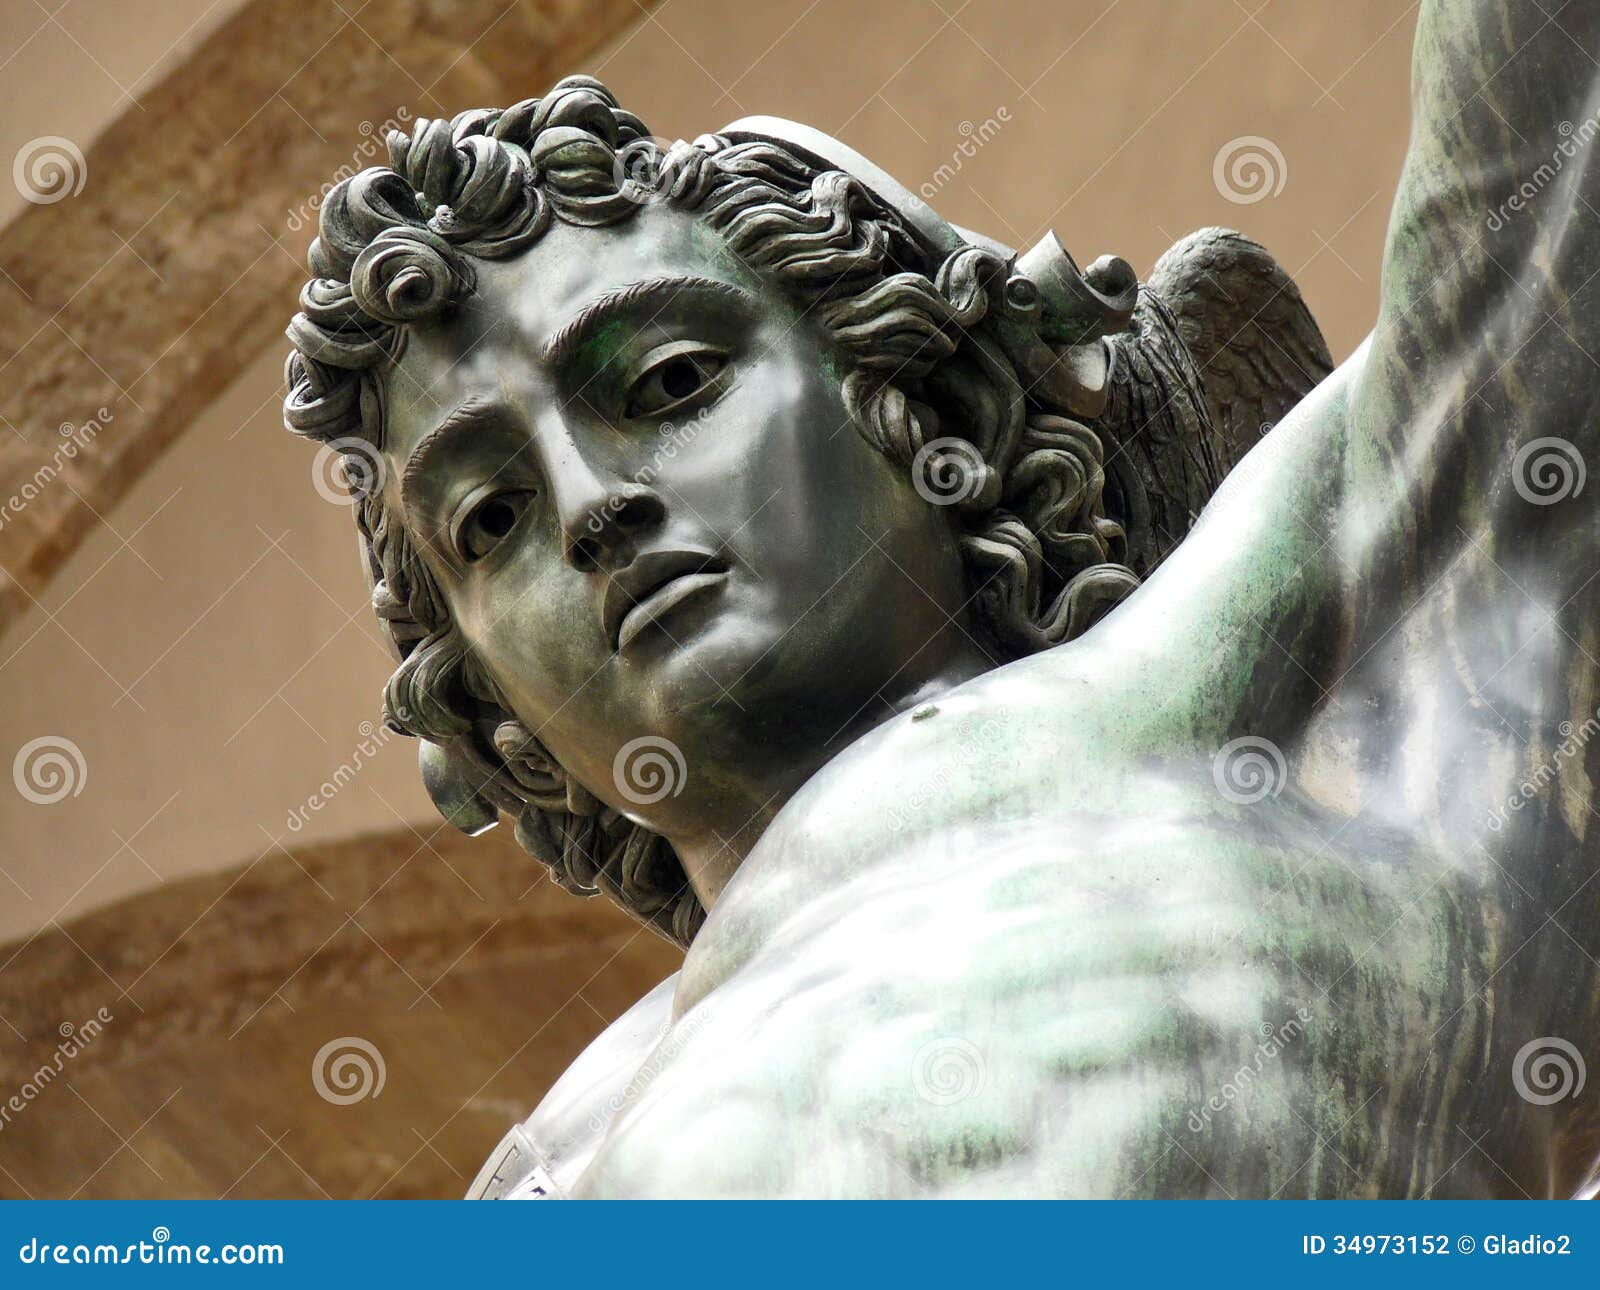 cellini, perseus, florence, italy